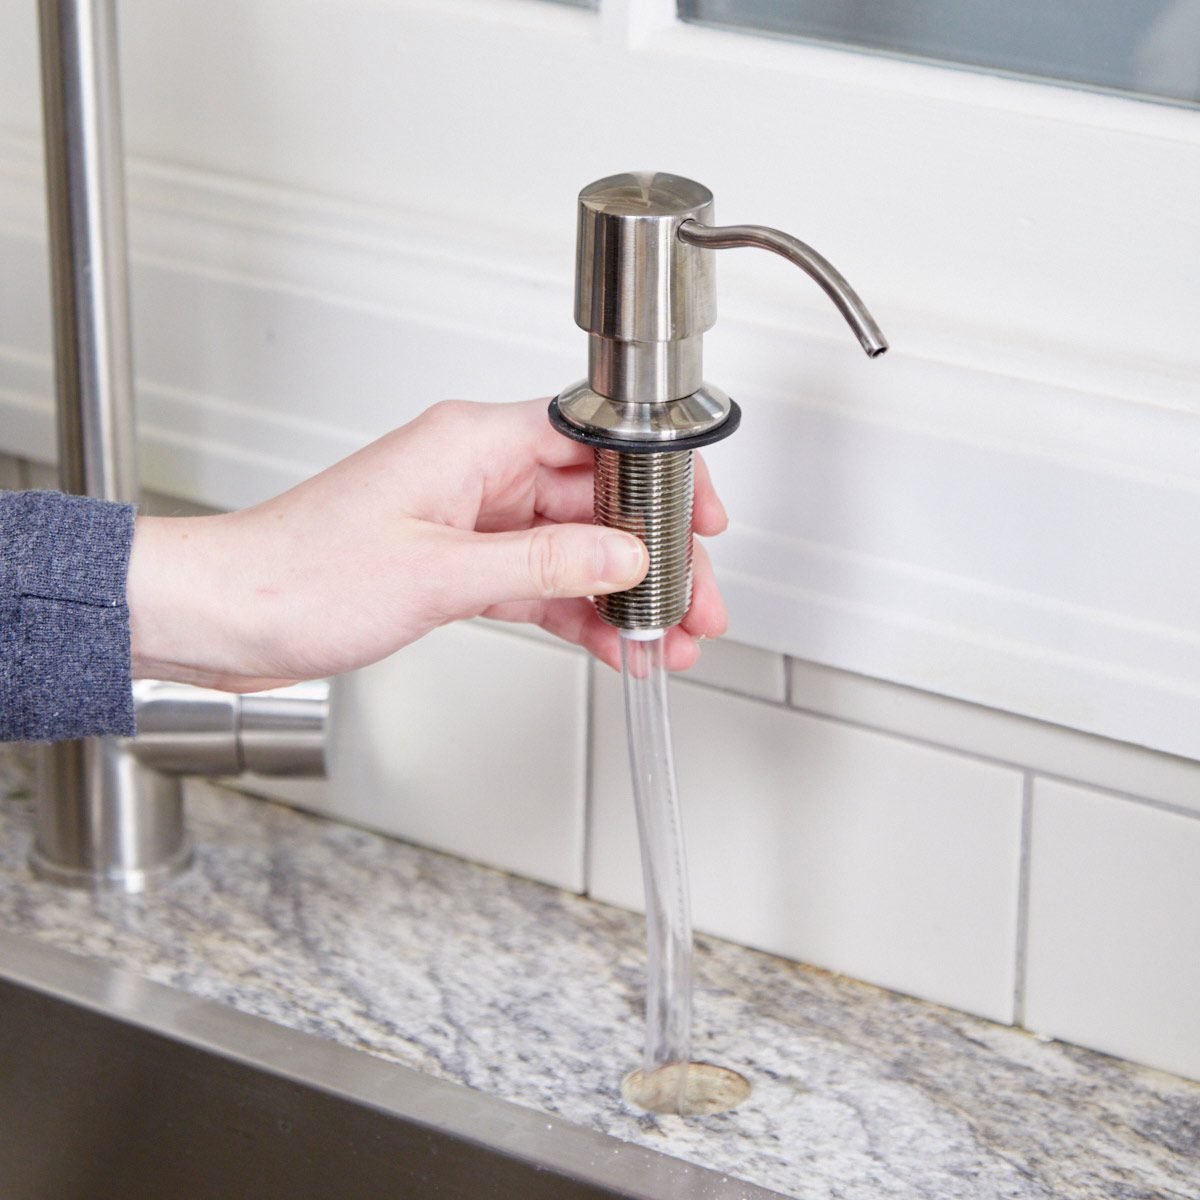 How to Install a Kitchen Sink Soap Dispenser - The Handyman's Daughter